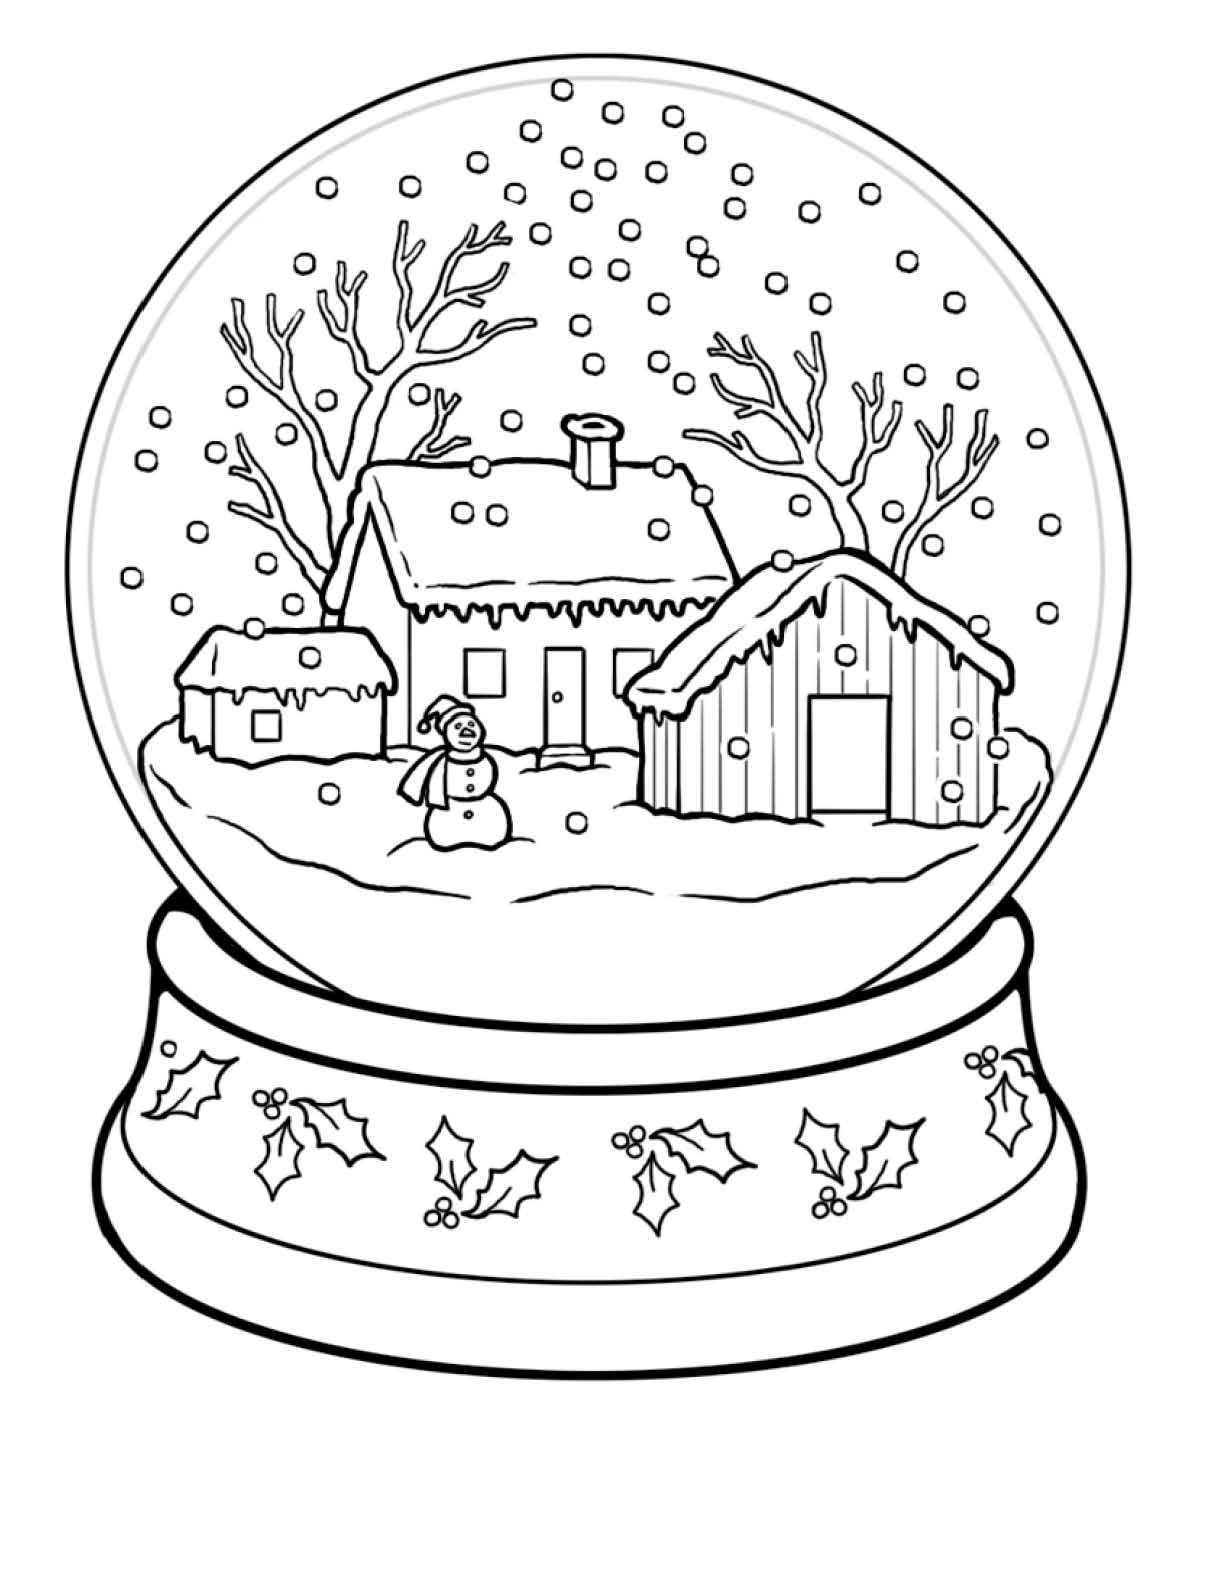 566 Simple Printable Winter Coloring Pages with Printable